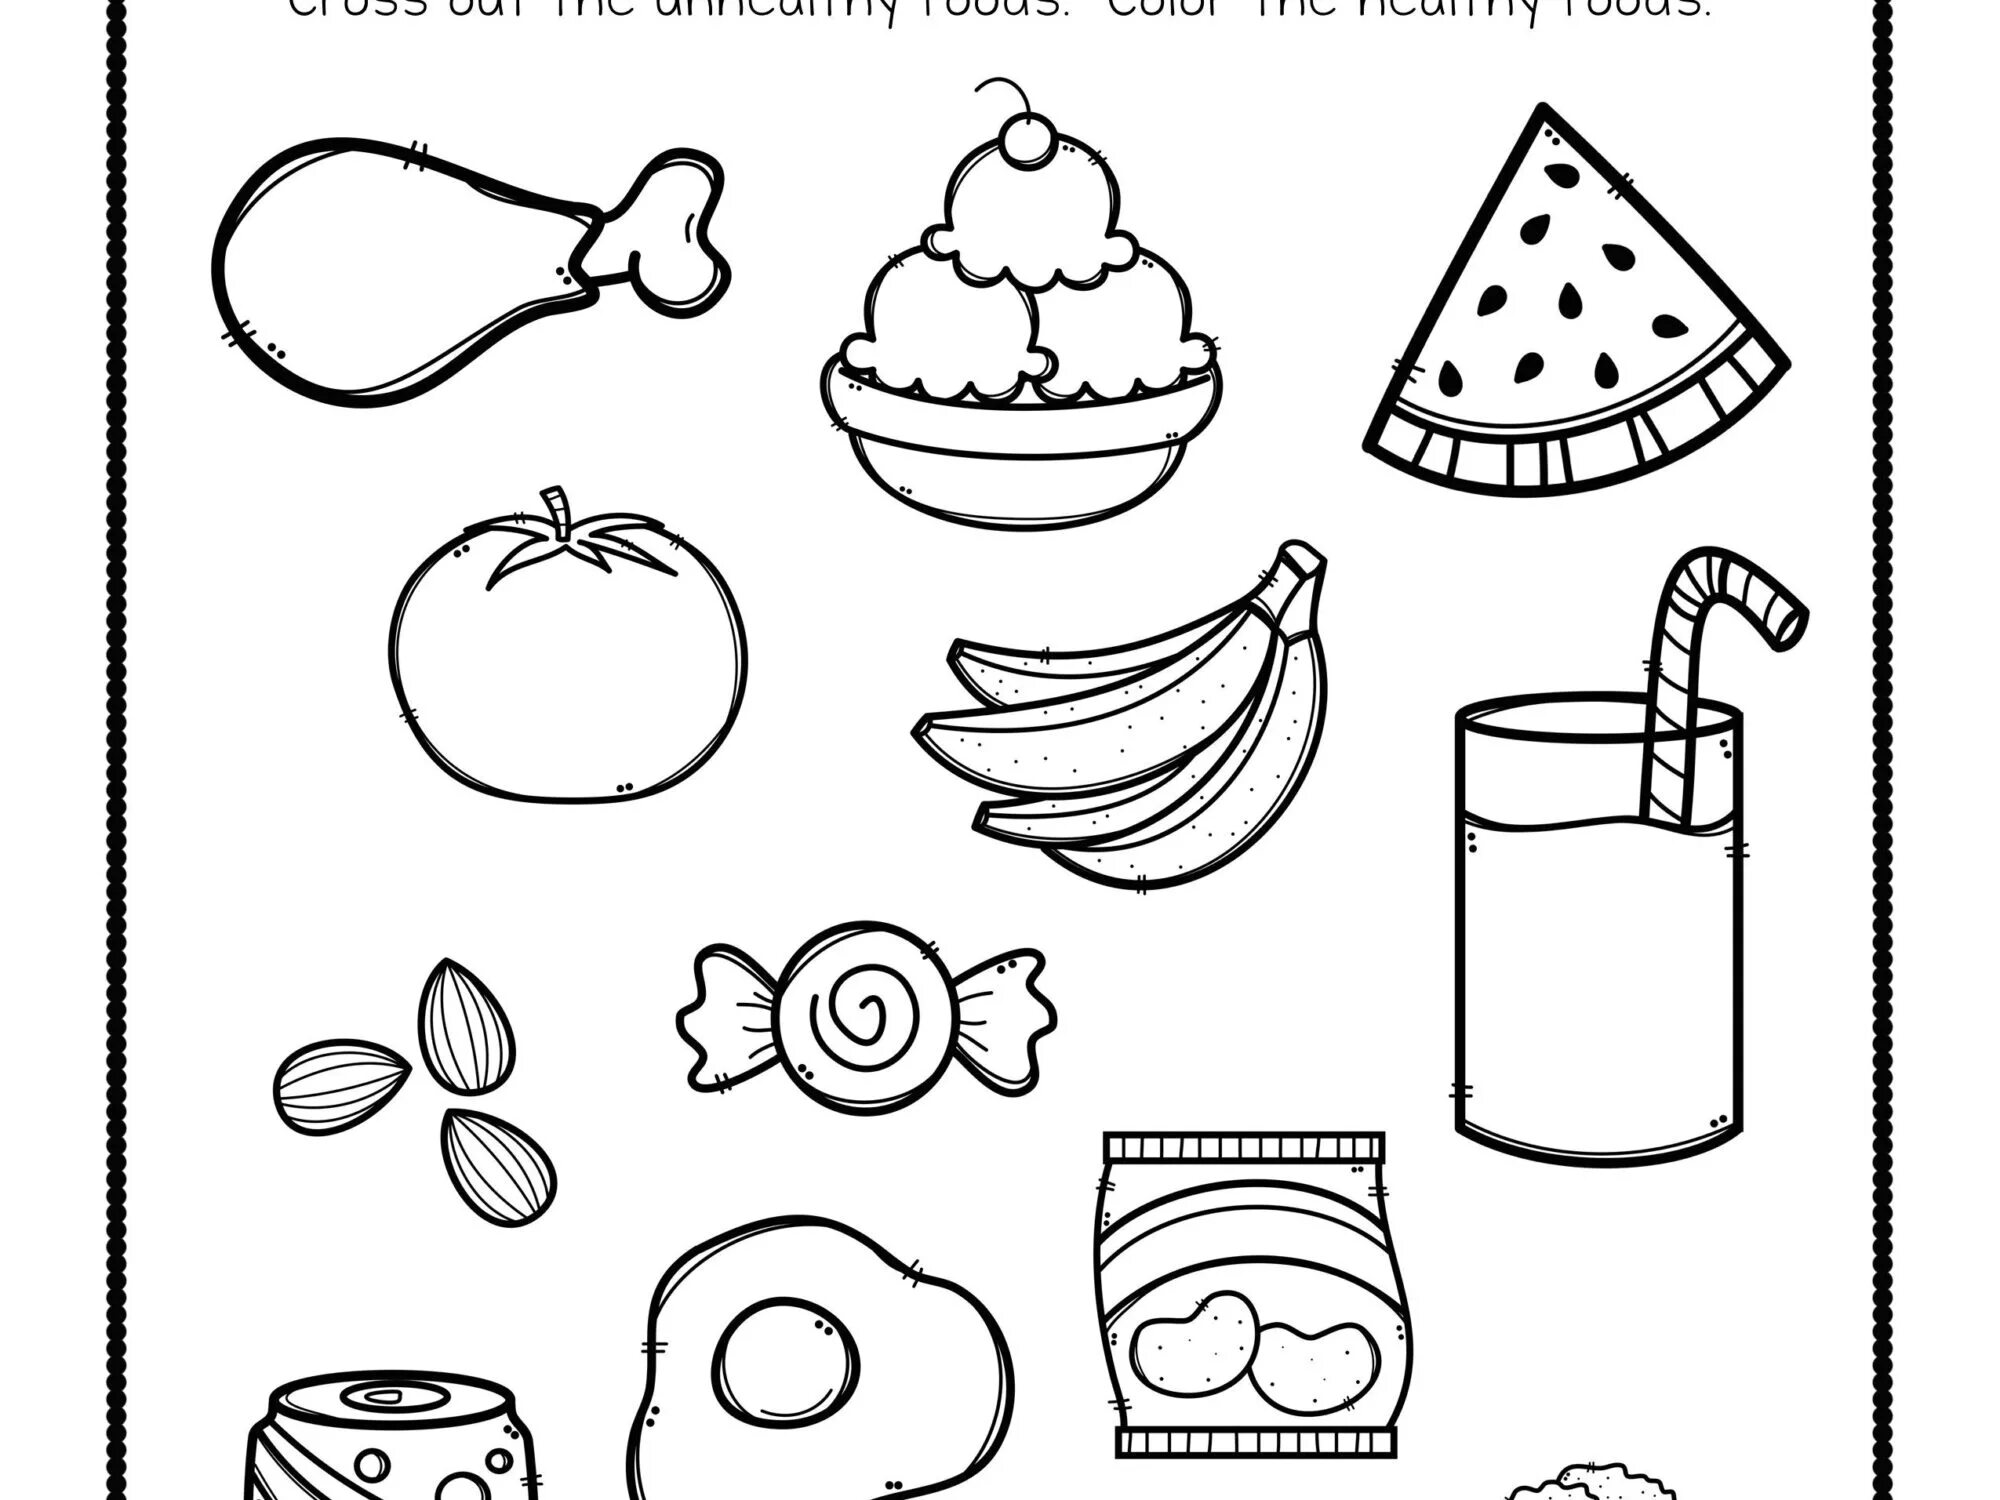 Fun foodstuffs coloring page for kids group logo 6-7 years old